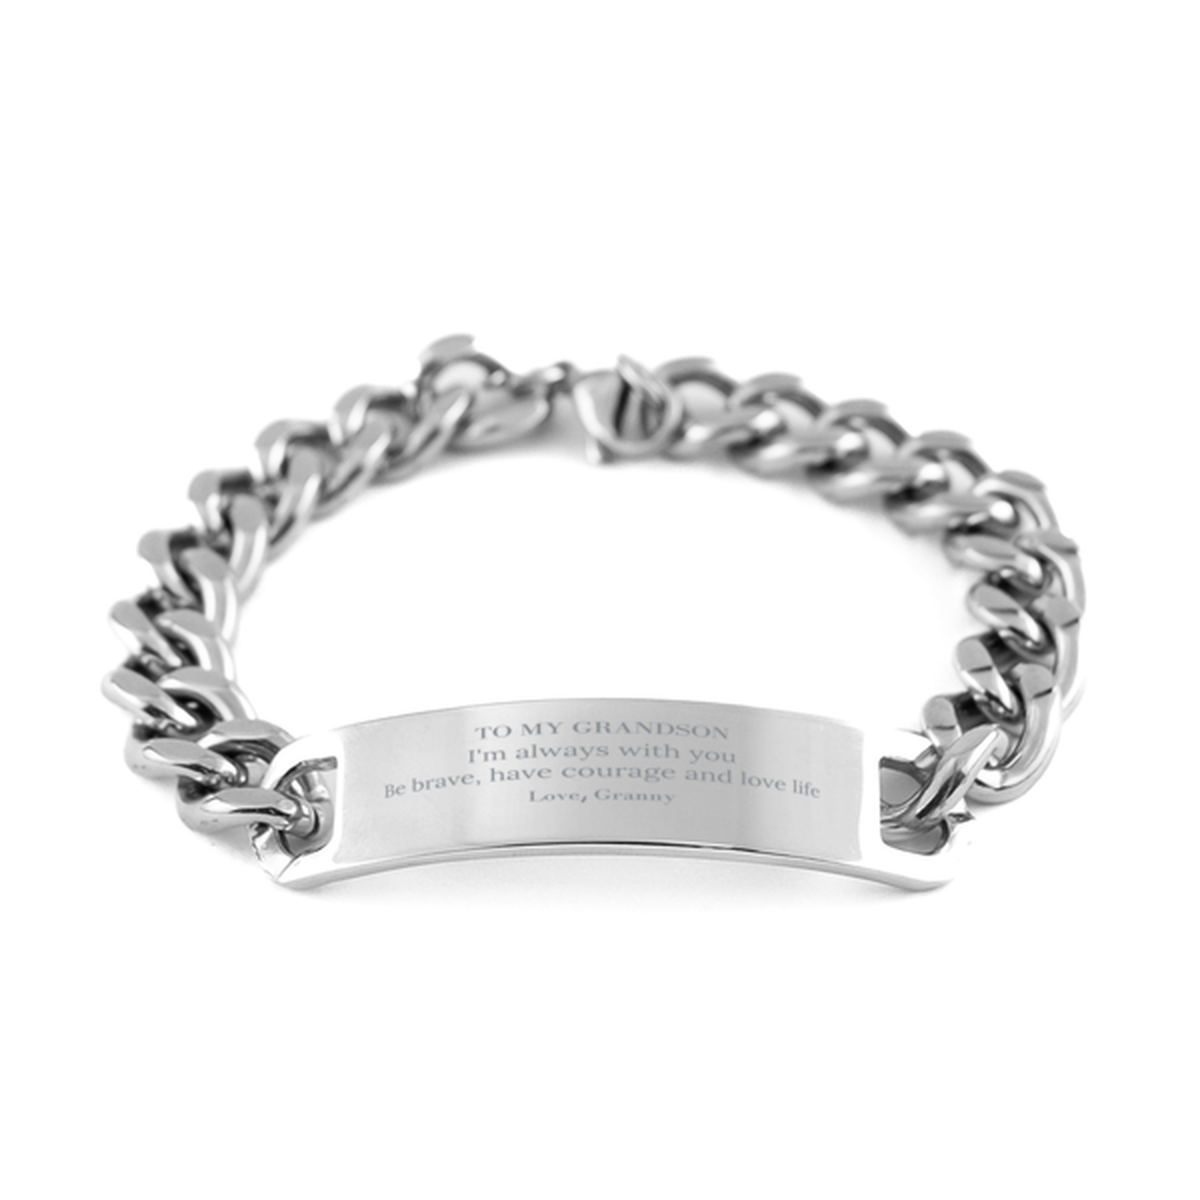 To My Grandson Gifts from Granny, Unique Cuban Chain Stainless Steel Bracelet Inspirational Christmas Birthday Graduation Gifts for Grandson I'm always with you. Be brave, have courage and love life. Love, Granny